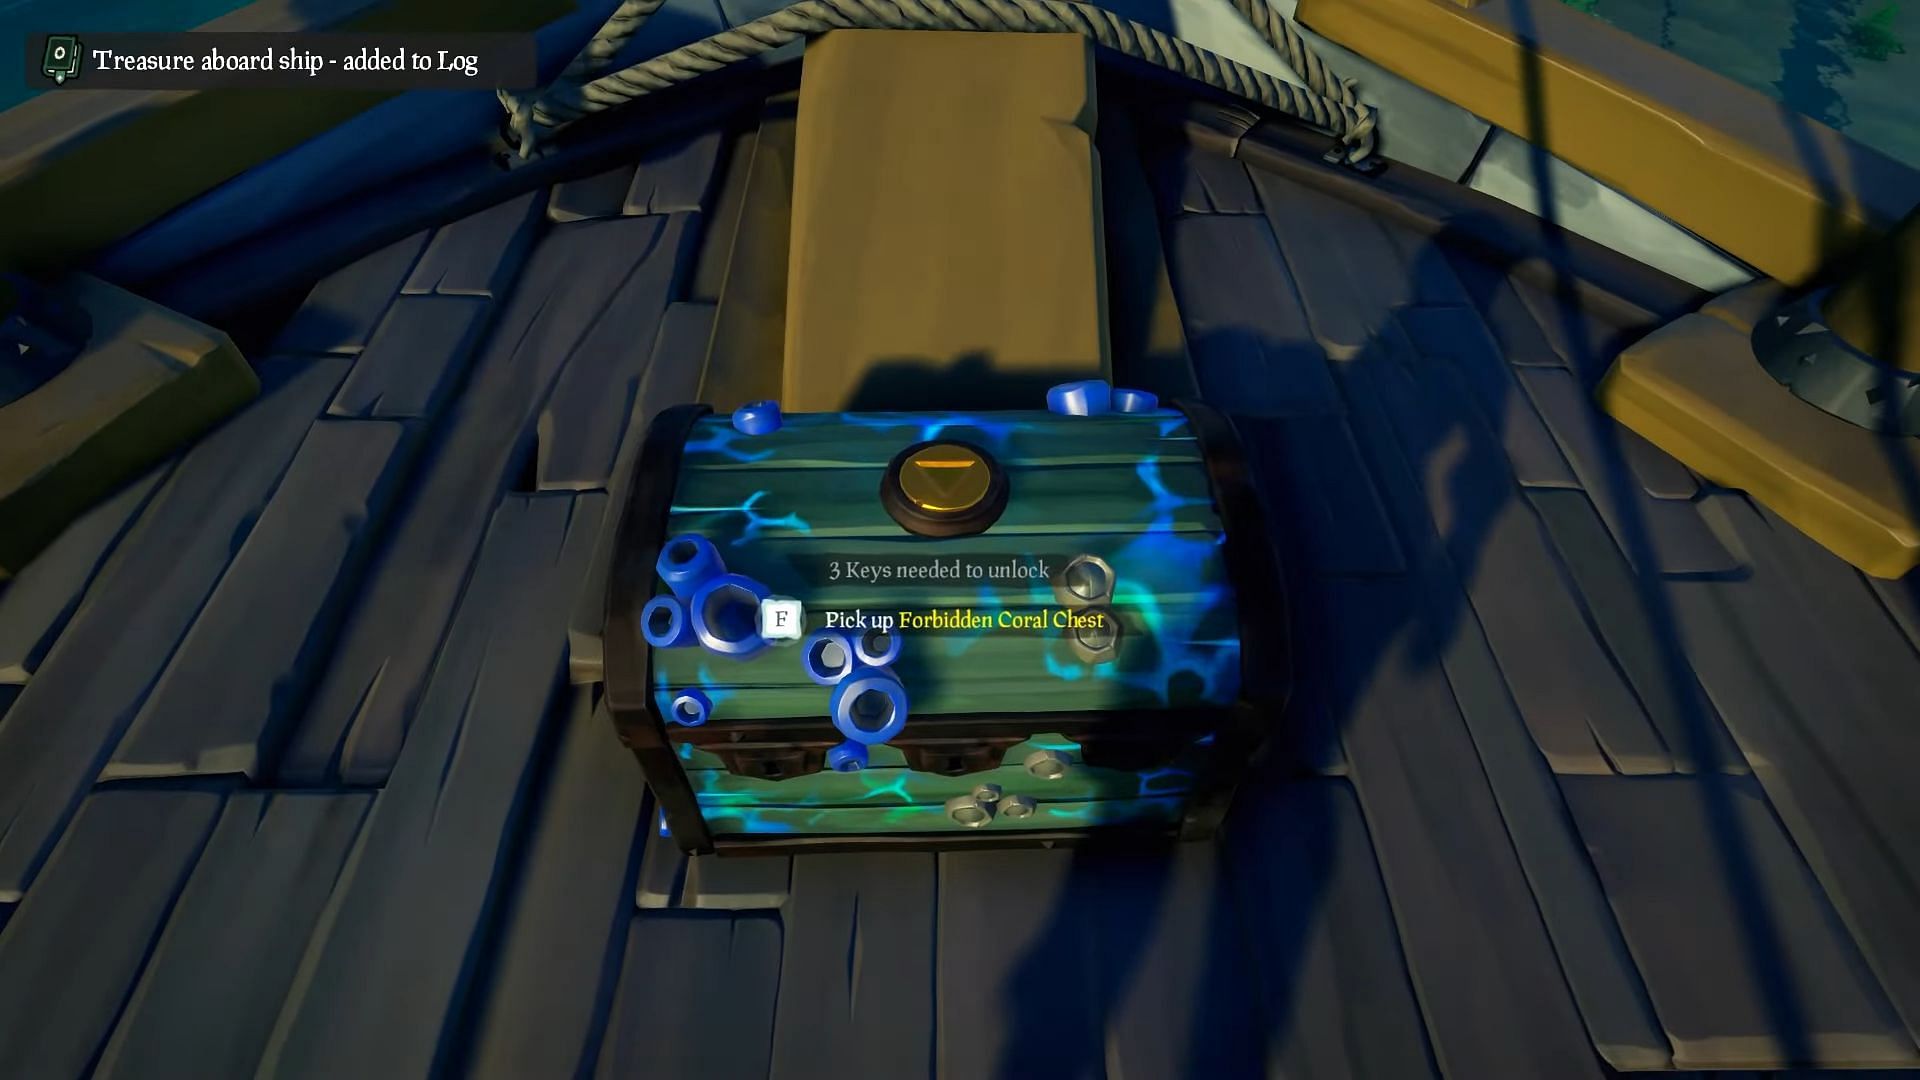 The Forbidden Coral Chest in the voyage (Image via Rare/ ConCon on YouTube)